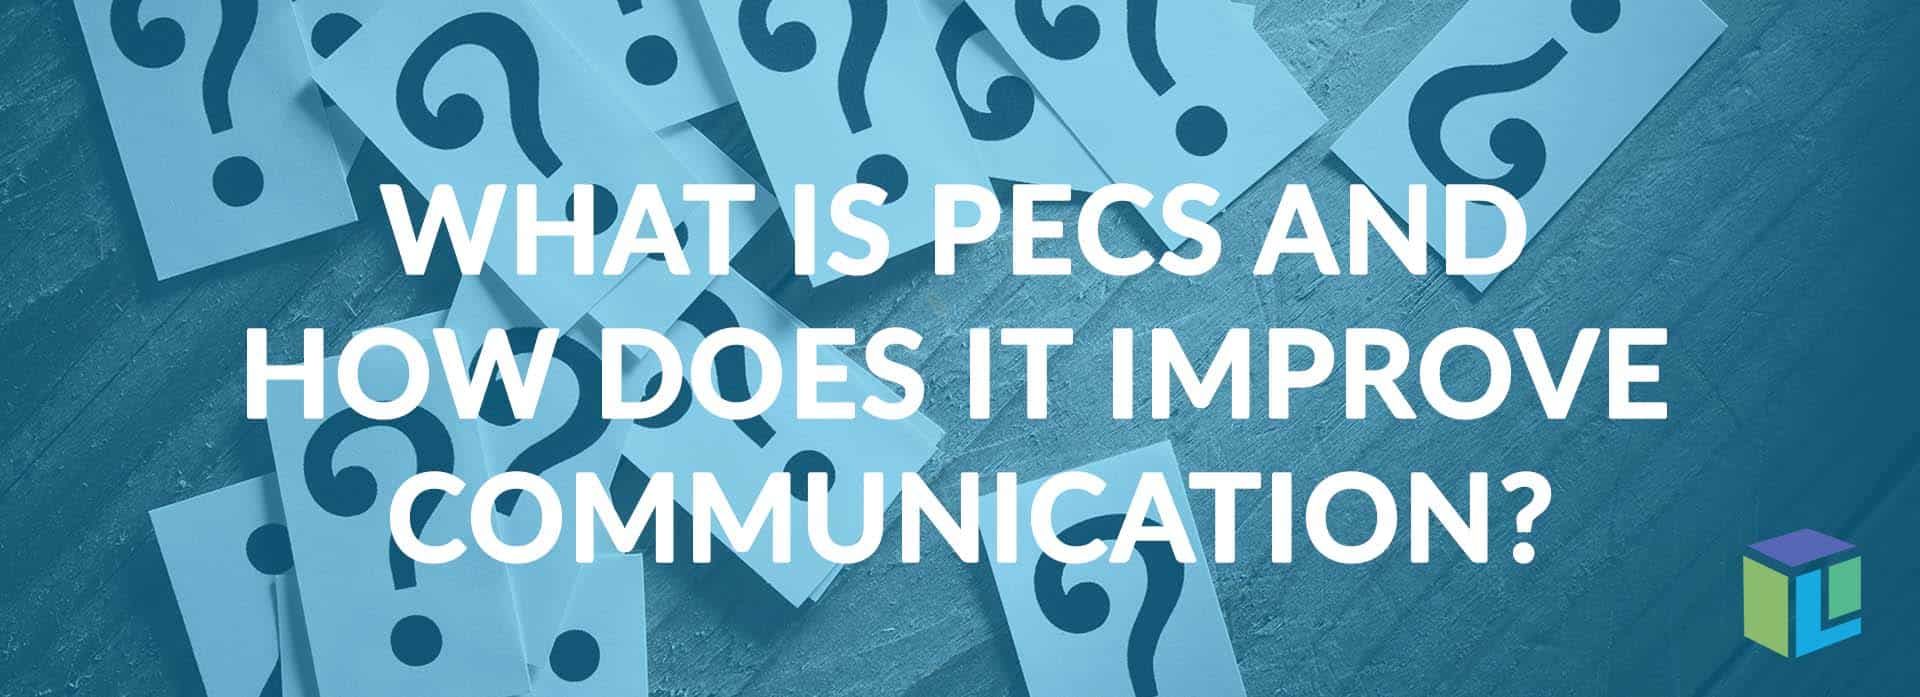 What Is PECS And How Does It Improve Communication? What Is PECS And How Does It Improve Communication? What Is PECS And How Does It Improve Communication? What Is PECS And How Does It Improve Communication?